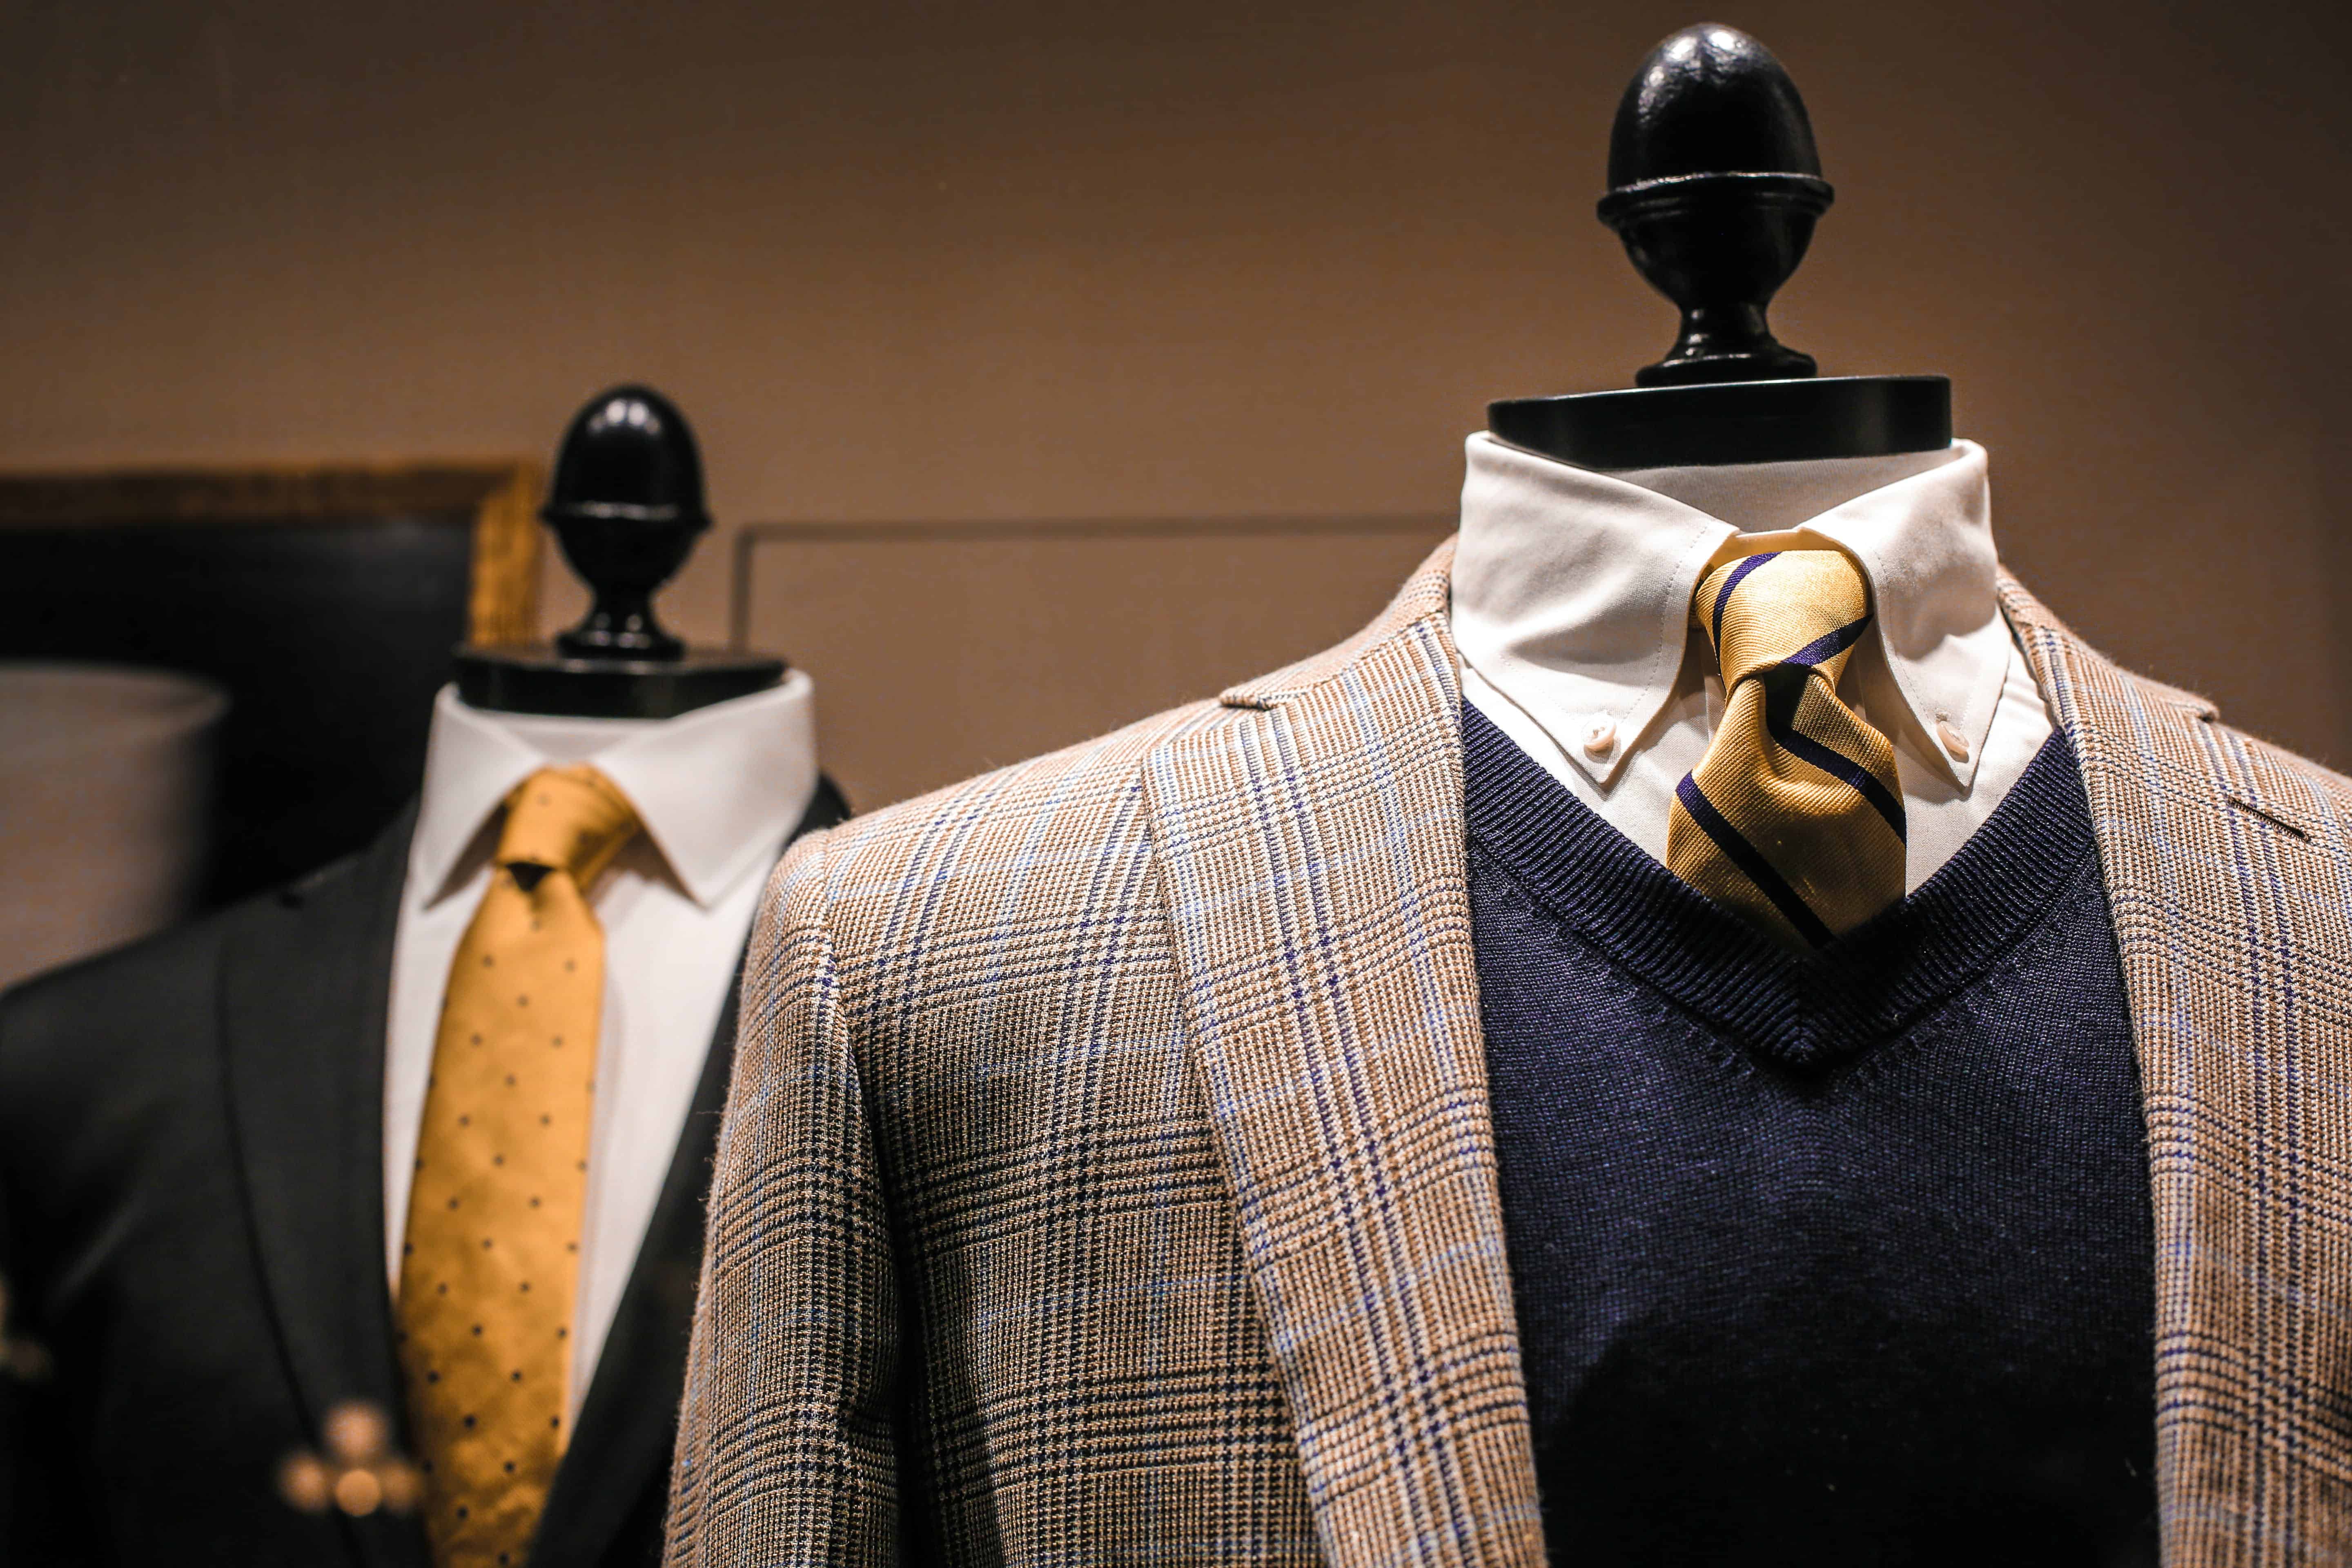 Dandy fancy jackets with shiny ties on dummies in showroom of contemporary male shop